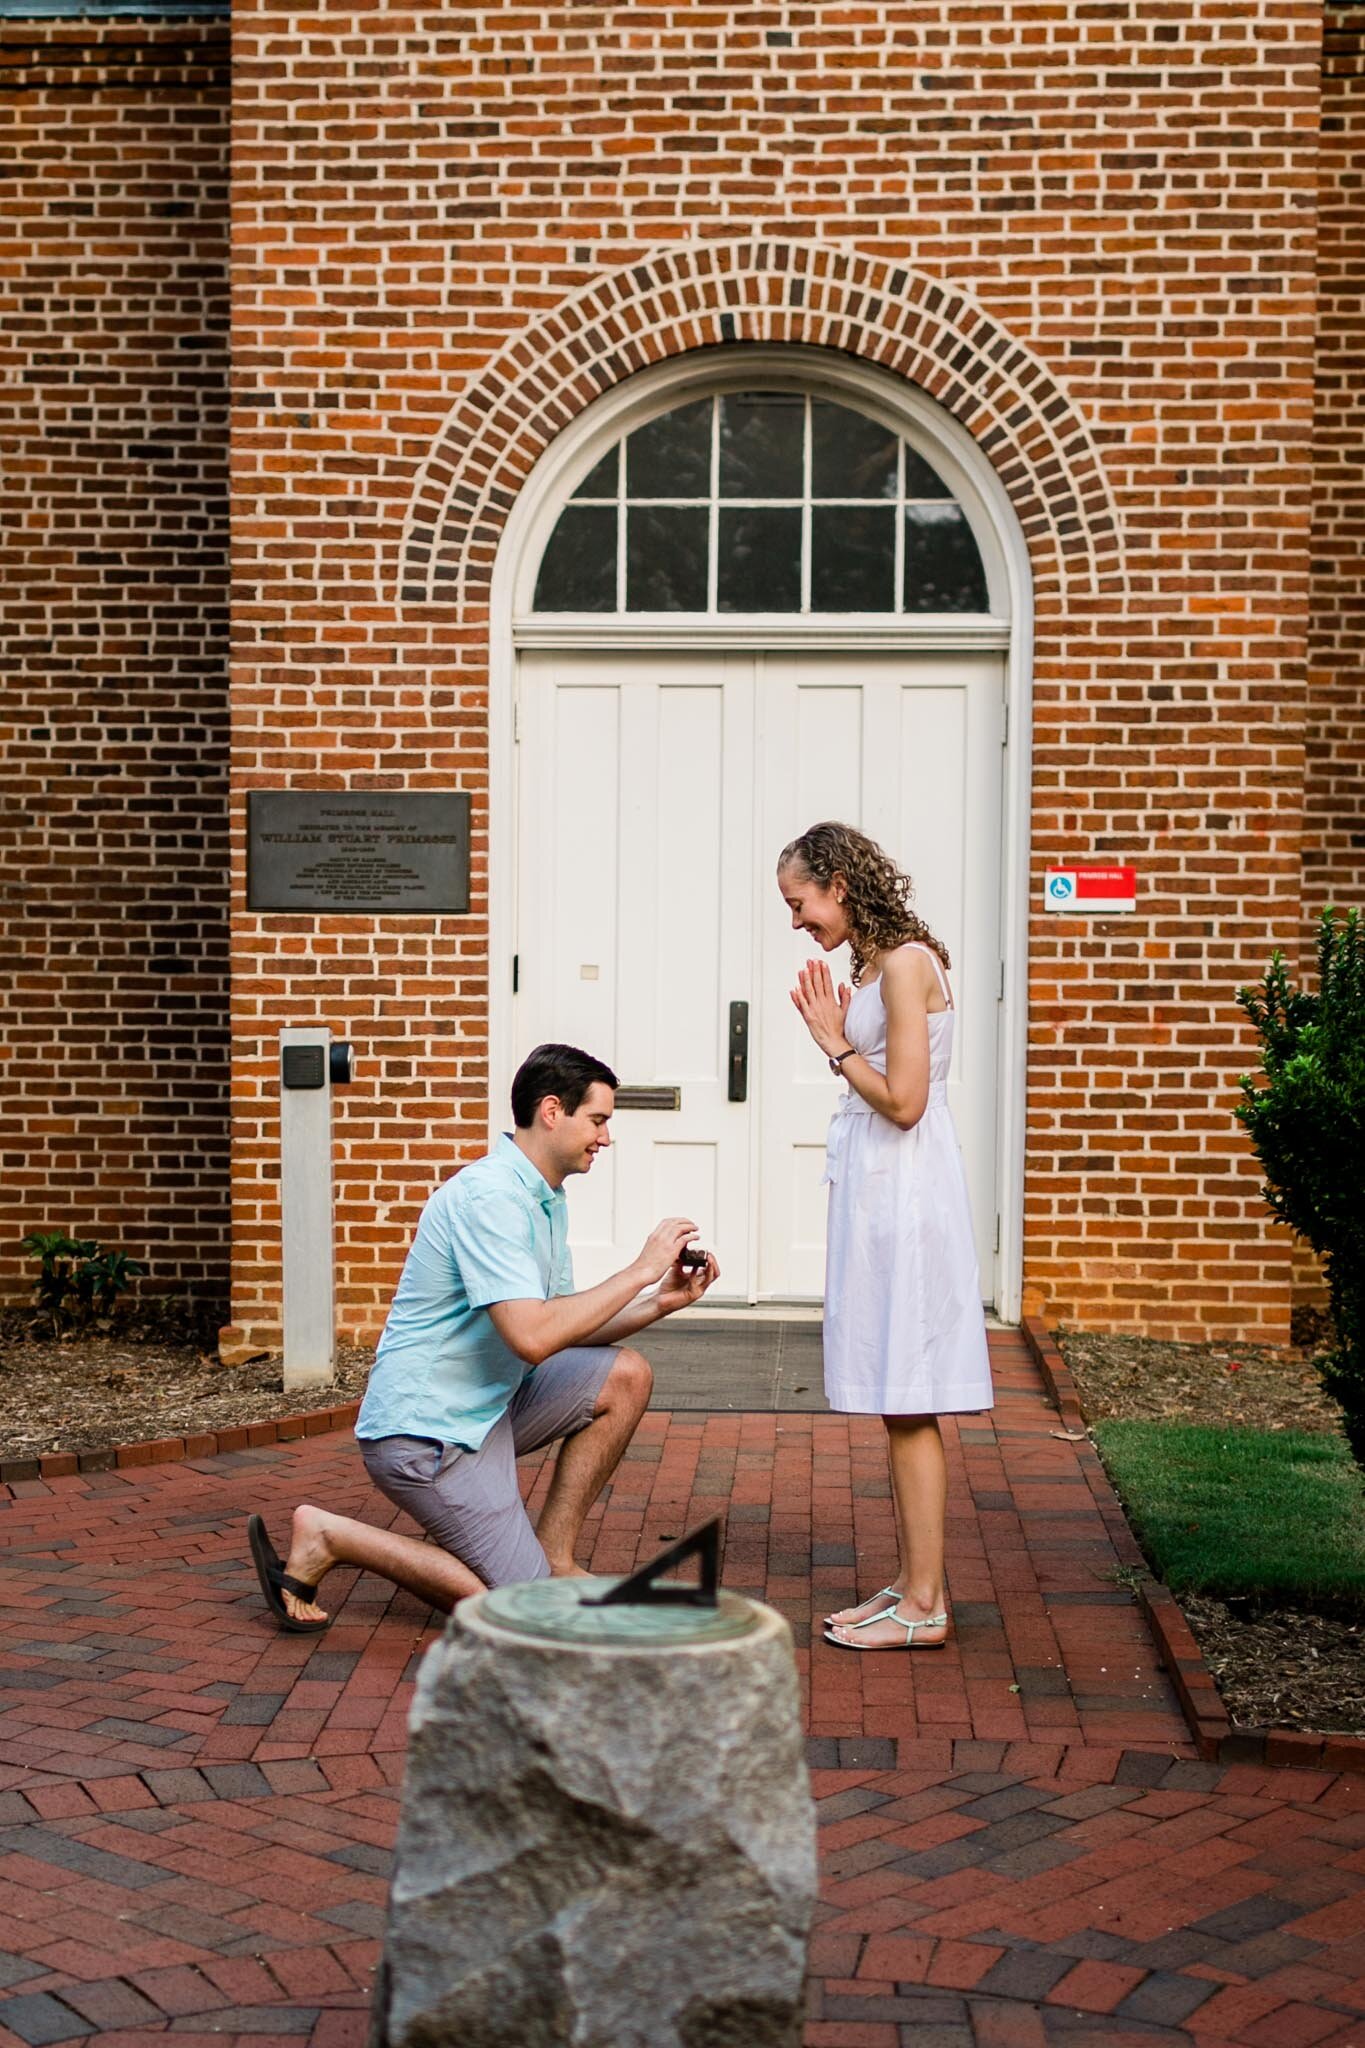 Raleigh Engagement Photographer | NC State University | By G. Lin Photography | Man proposing to woman